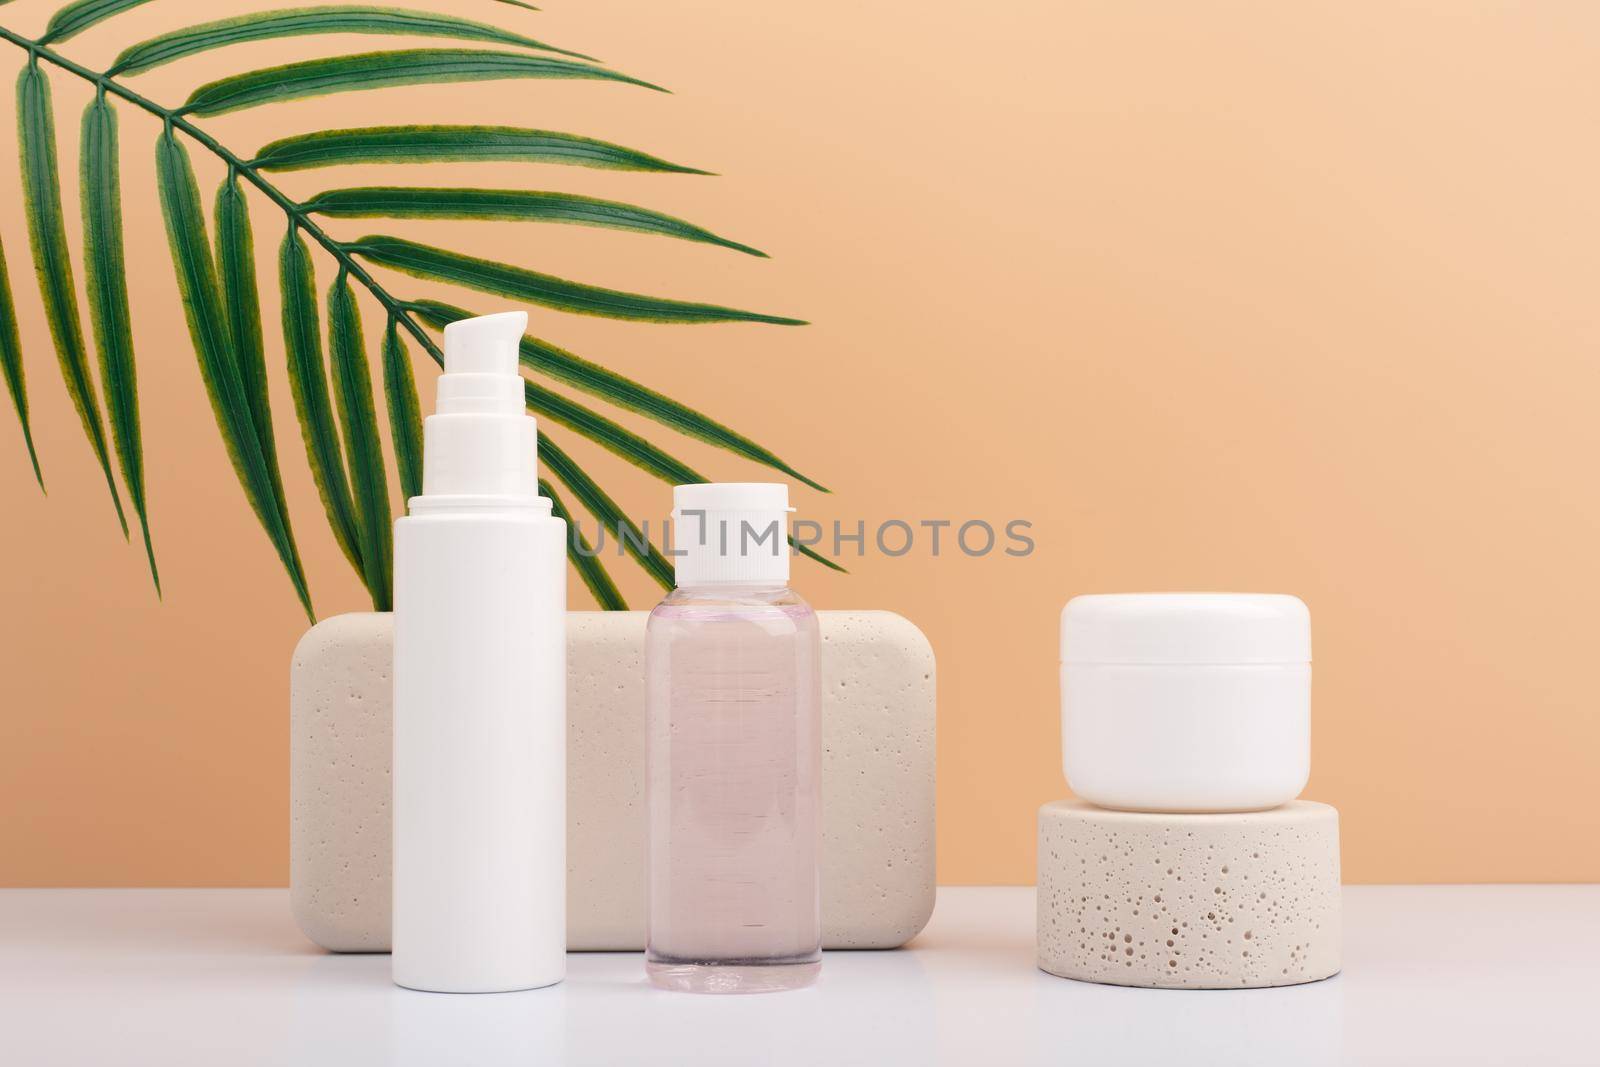 Face cream, cleansing lotion and under eye gel against beige background with palm leaf. Concept of daily skin treatment and beauty products for healthy skin